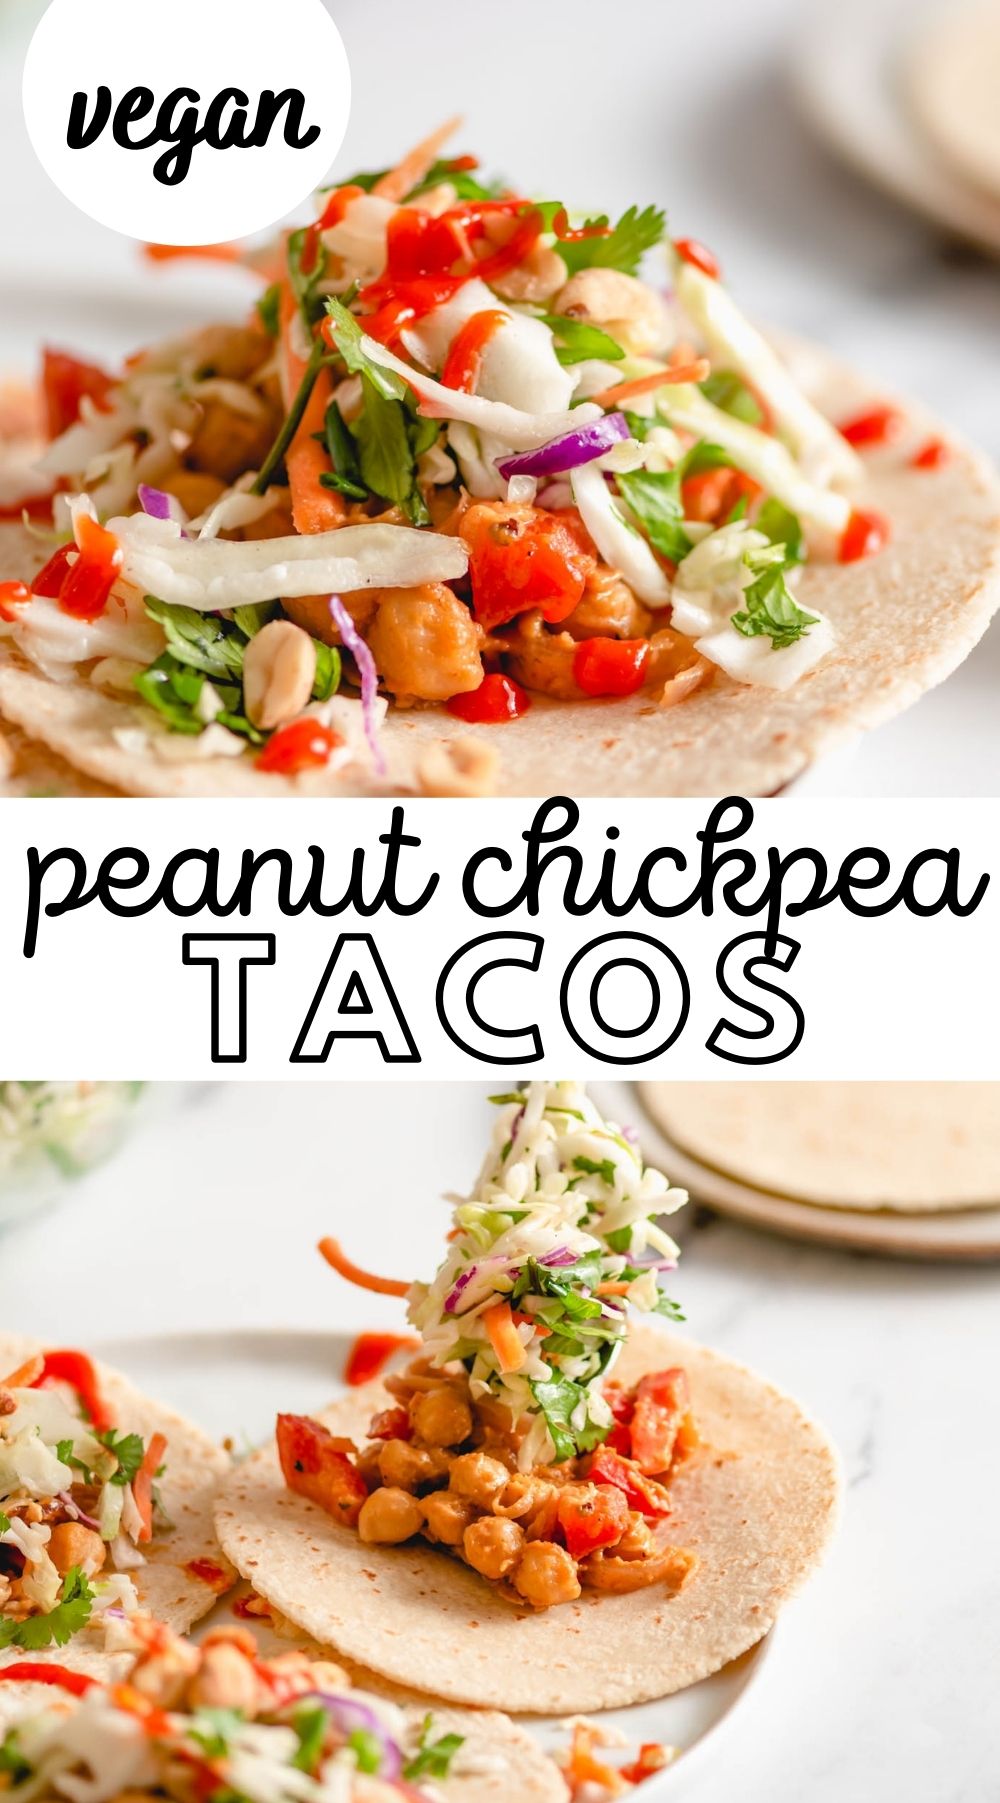 Pinterest graphic with an image and text for vegan chickpea peanut tacos.